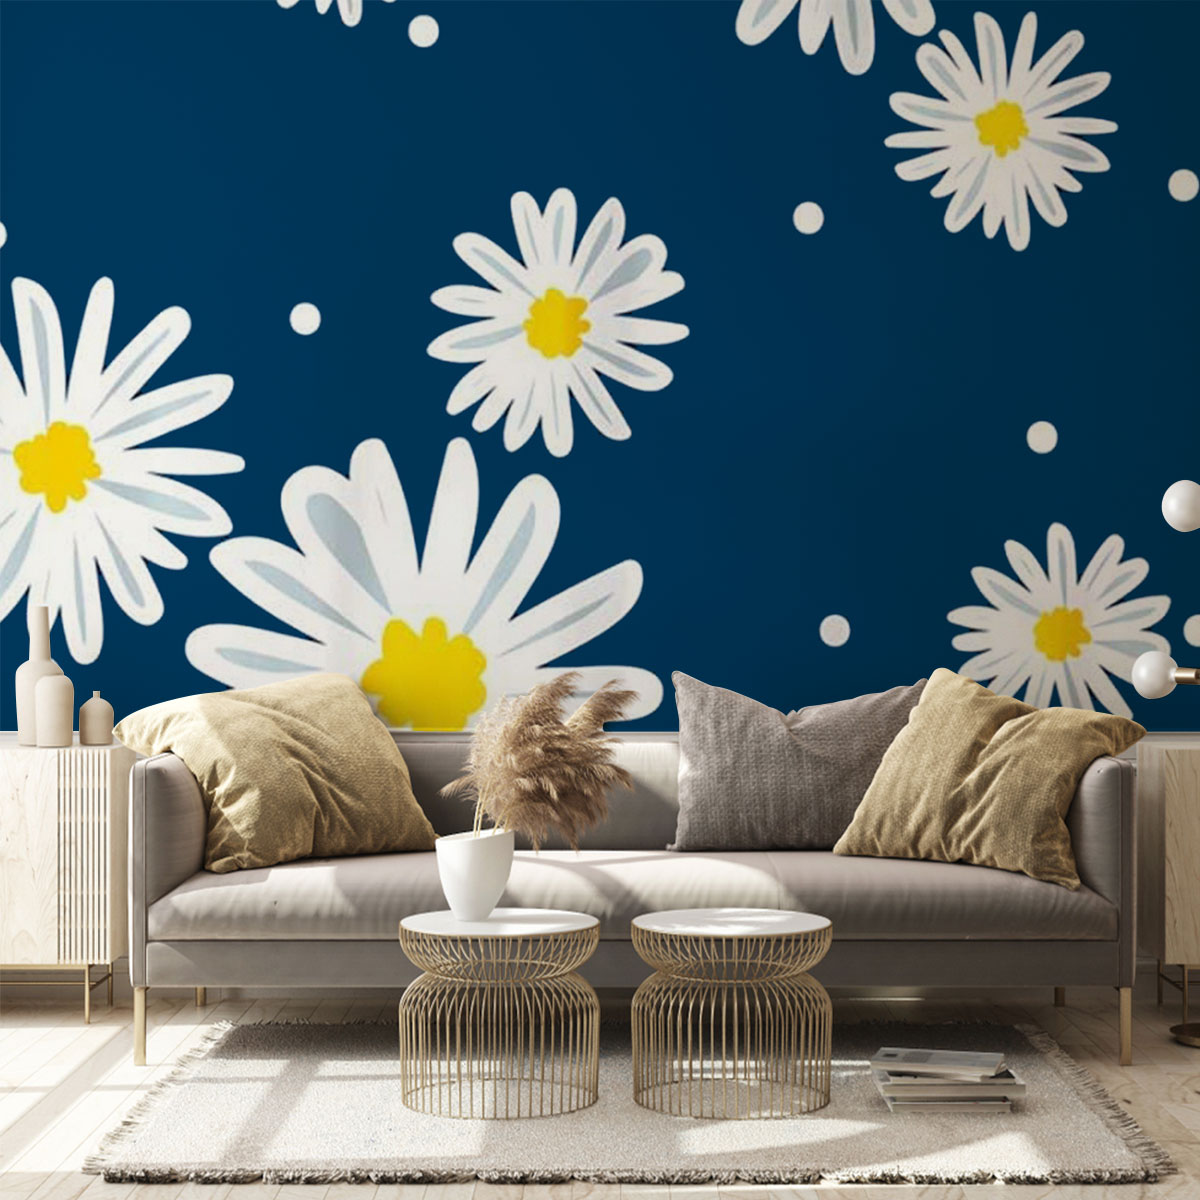 Abstract Daisy With Blue Wall Mural